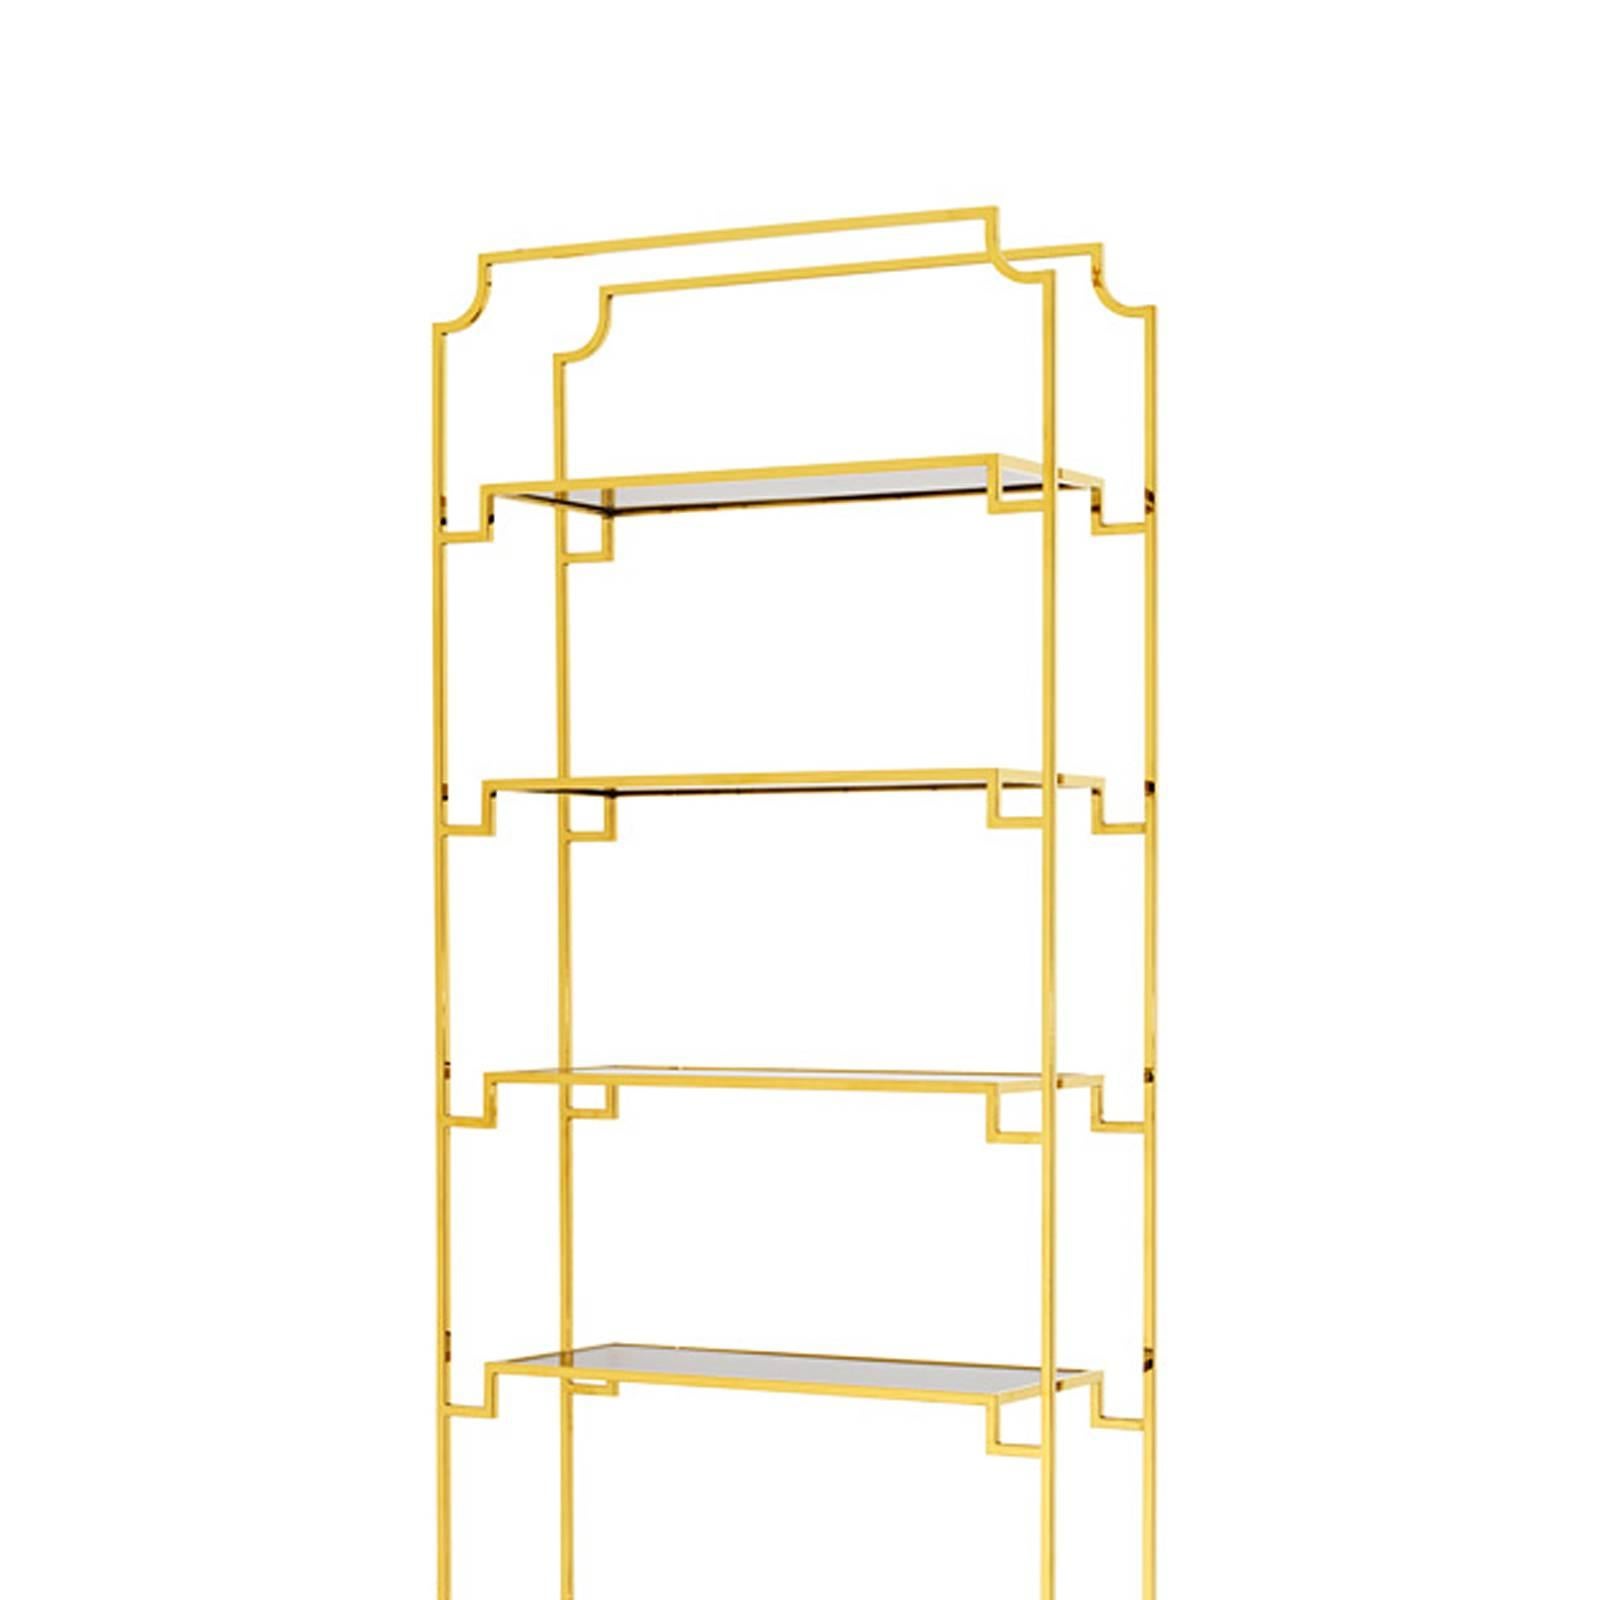 Bookshelves Stantord with structure in gold finish
and six shelves in smoked glass.
